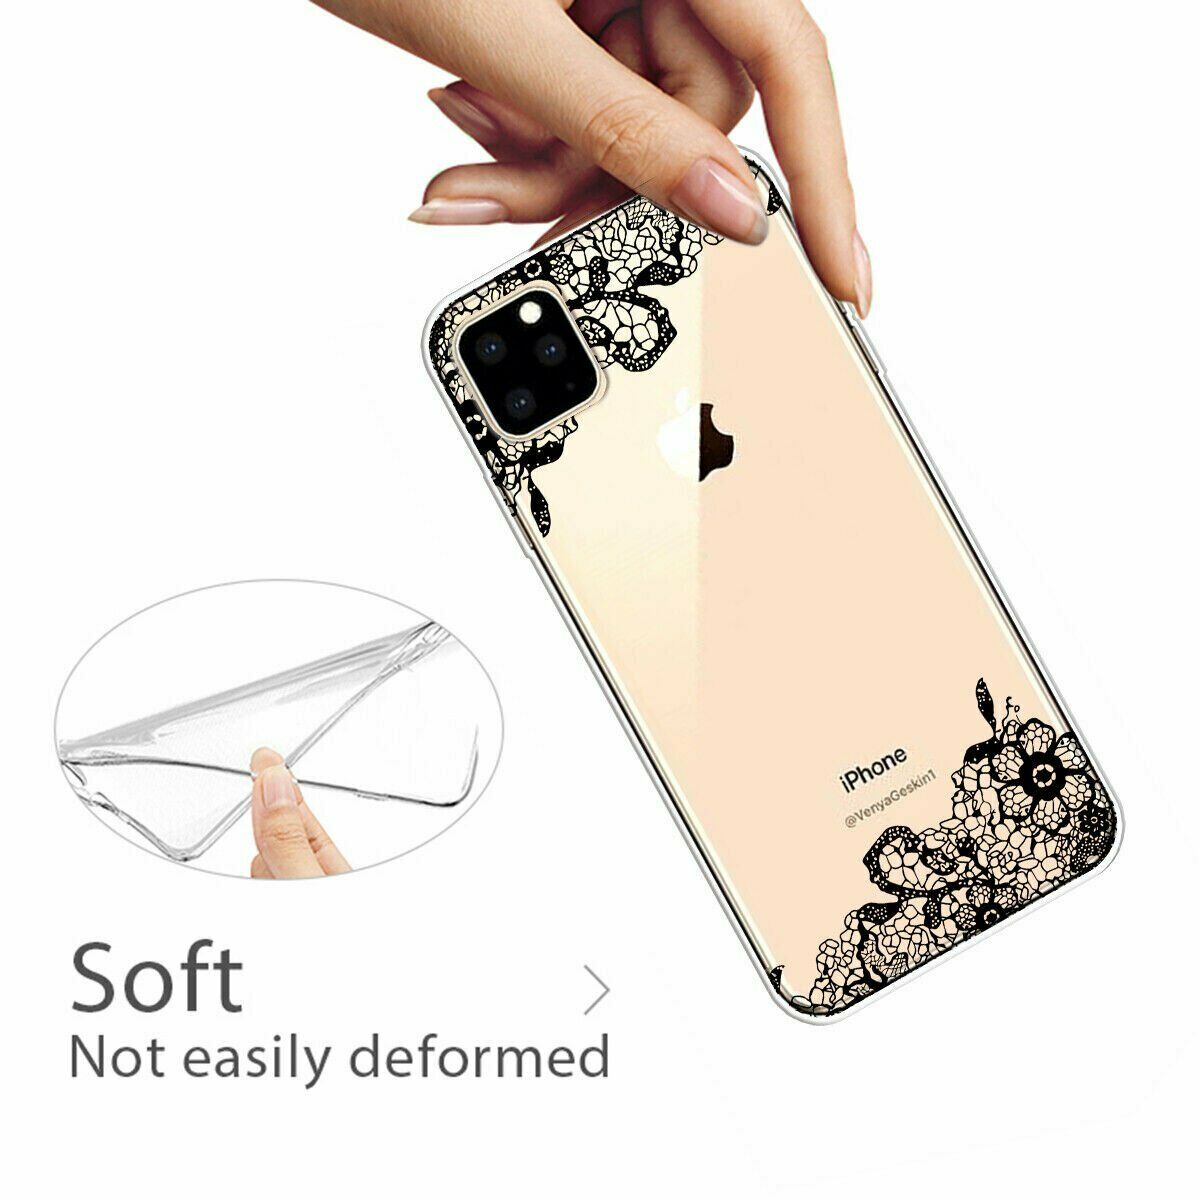 Slim Pattern Soft Rubber Silicone Clear Back Case For iPhone